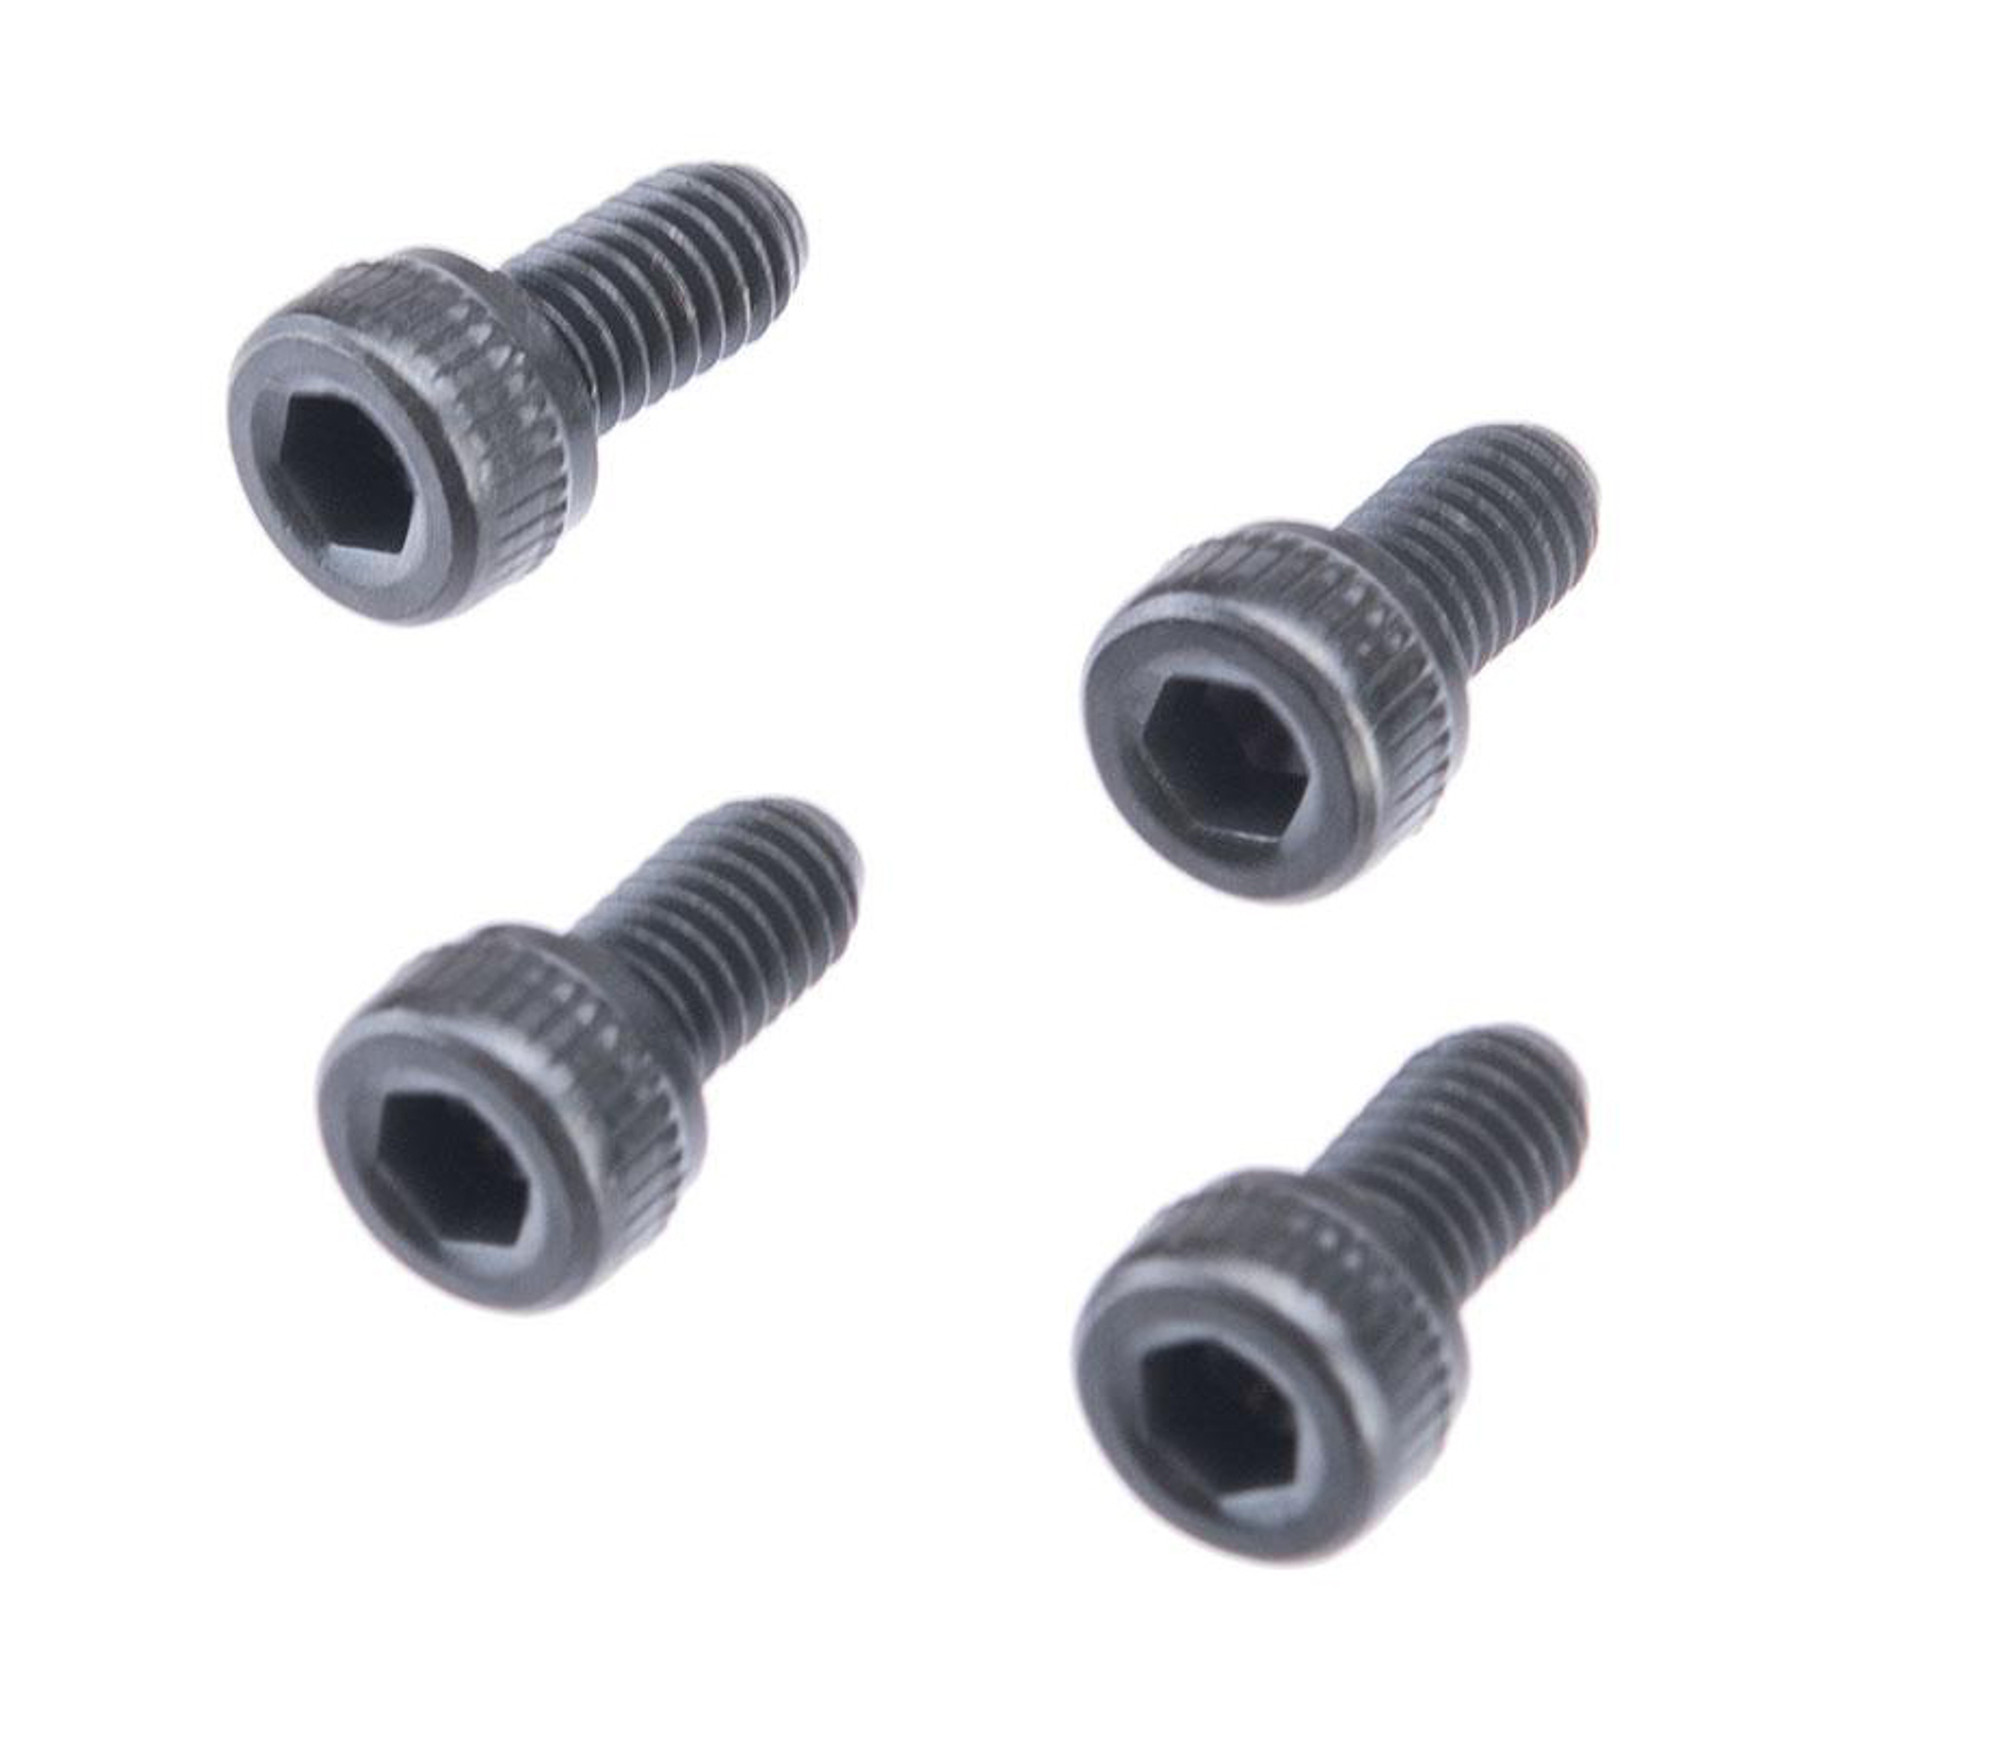 Krytac Replacement Stock Body Screw Set for Trident MKII PDW-M Airsoft AEG Rifle